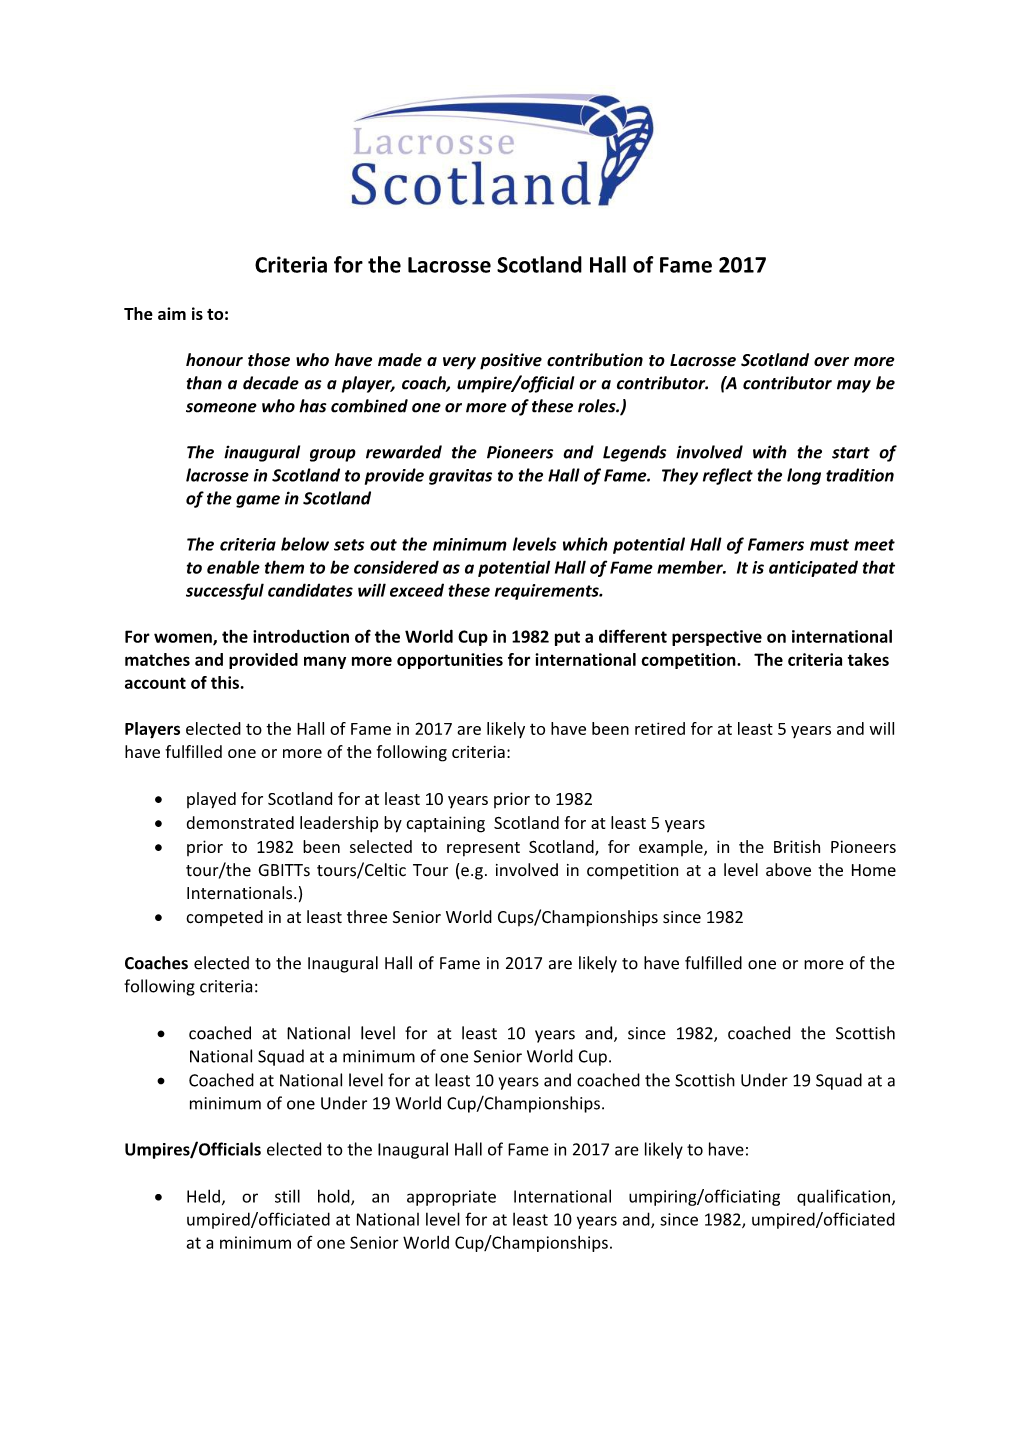 Criteria for the Lacrosse Scotland Hall of Fame 2017